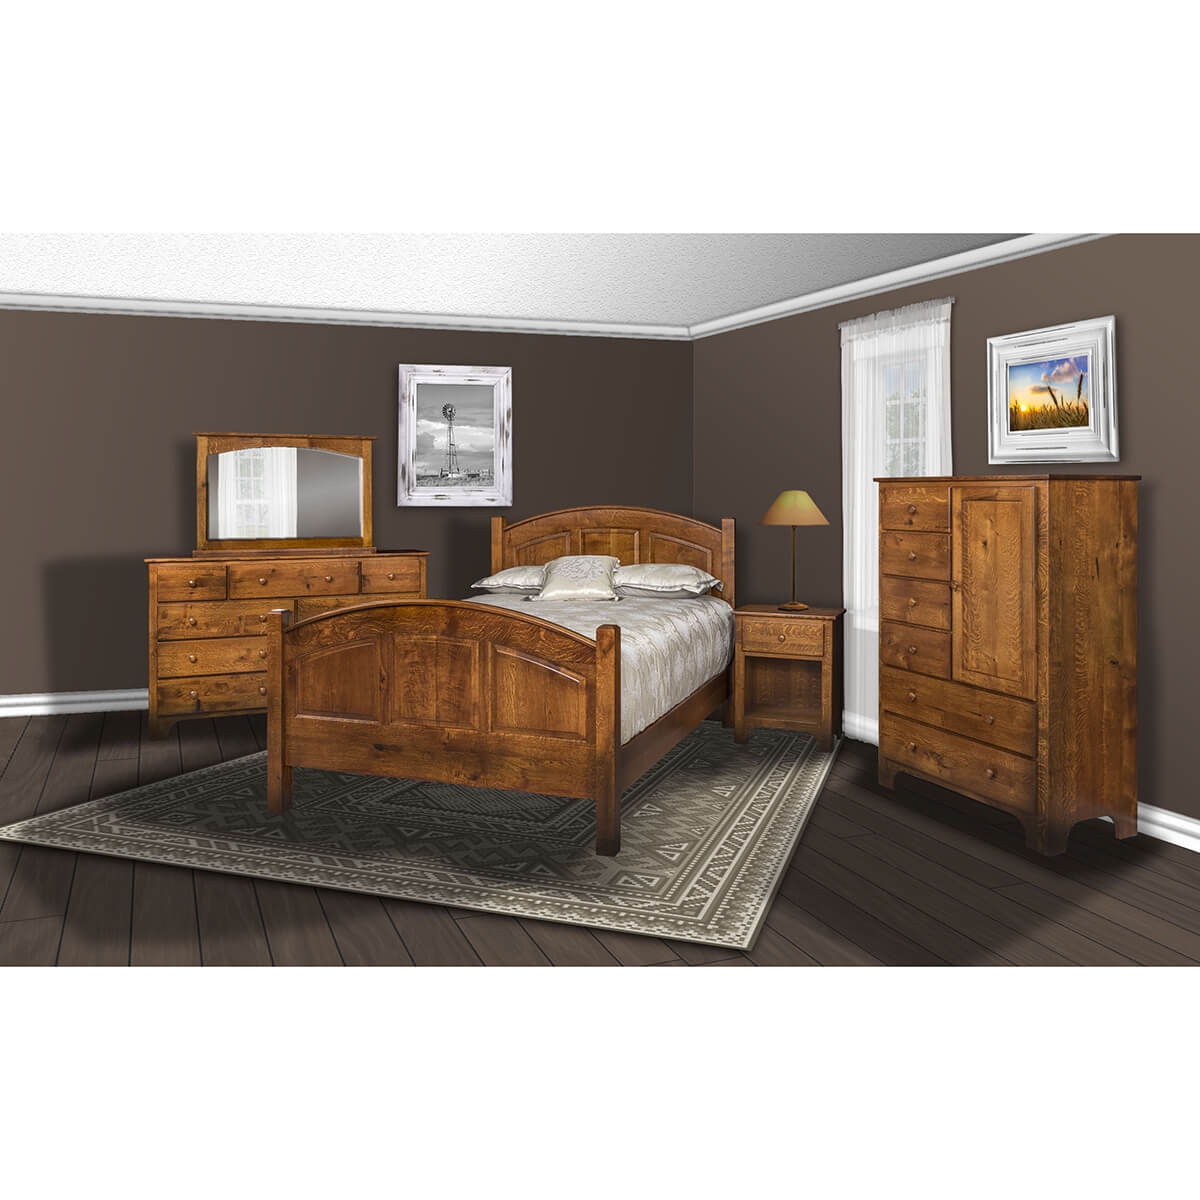 Read more about the article Ridgecrest Shaker Bedroom Collection